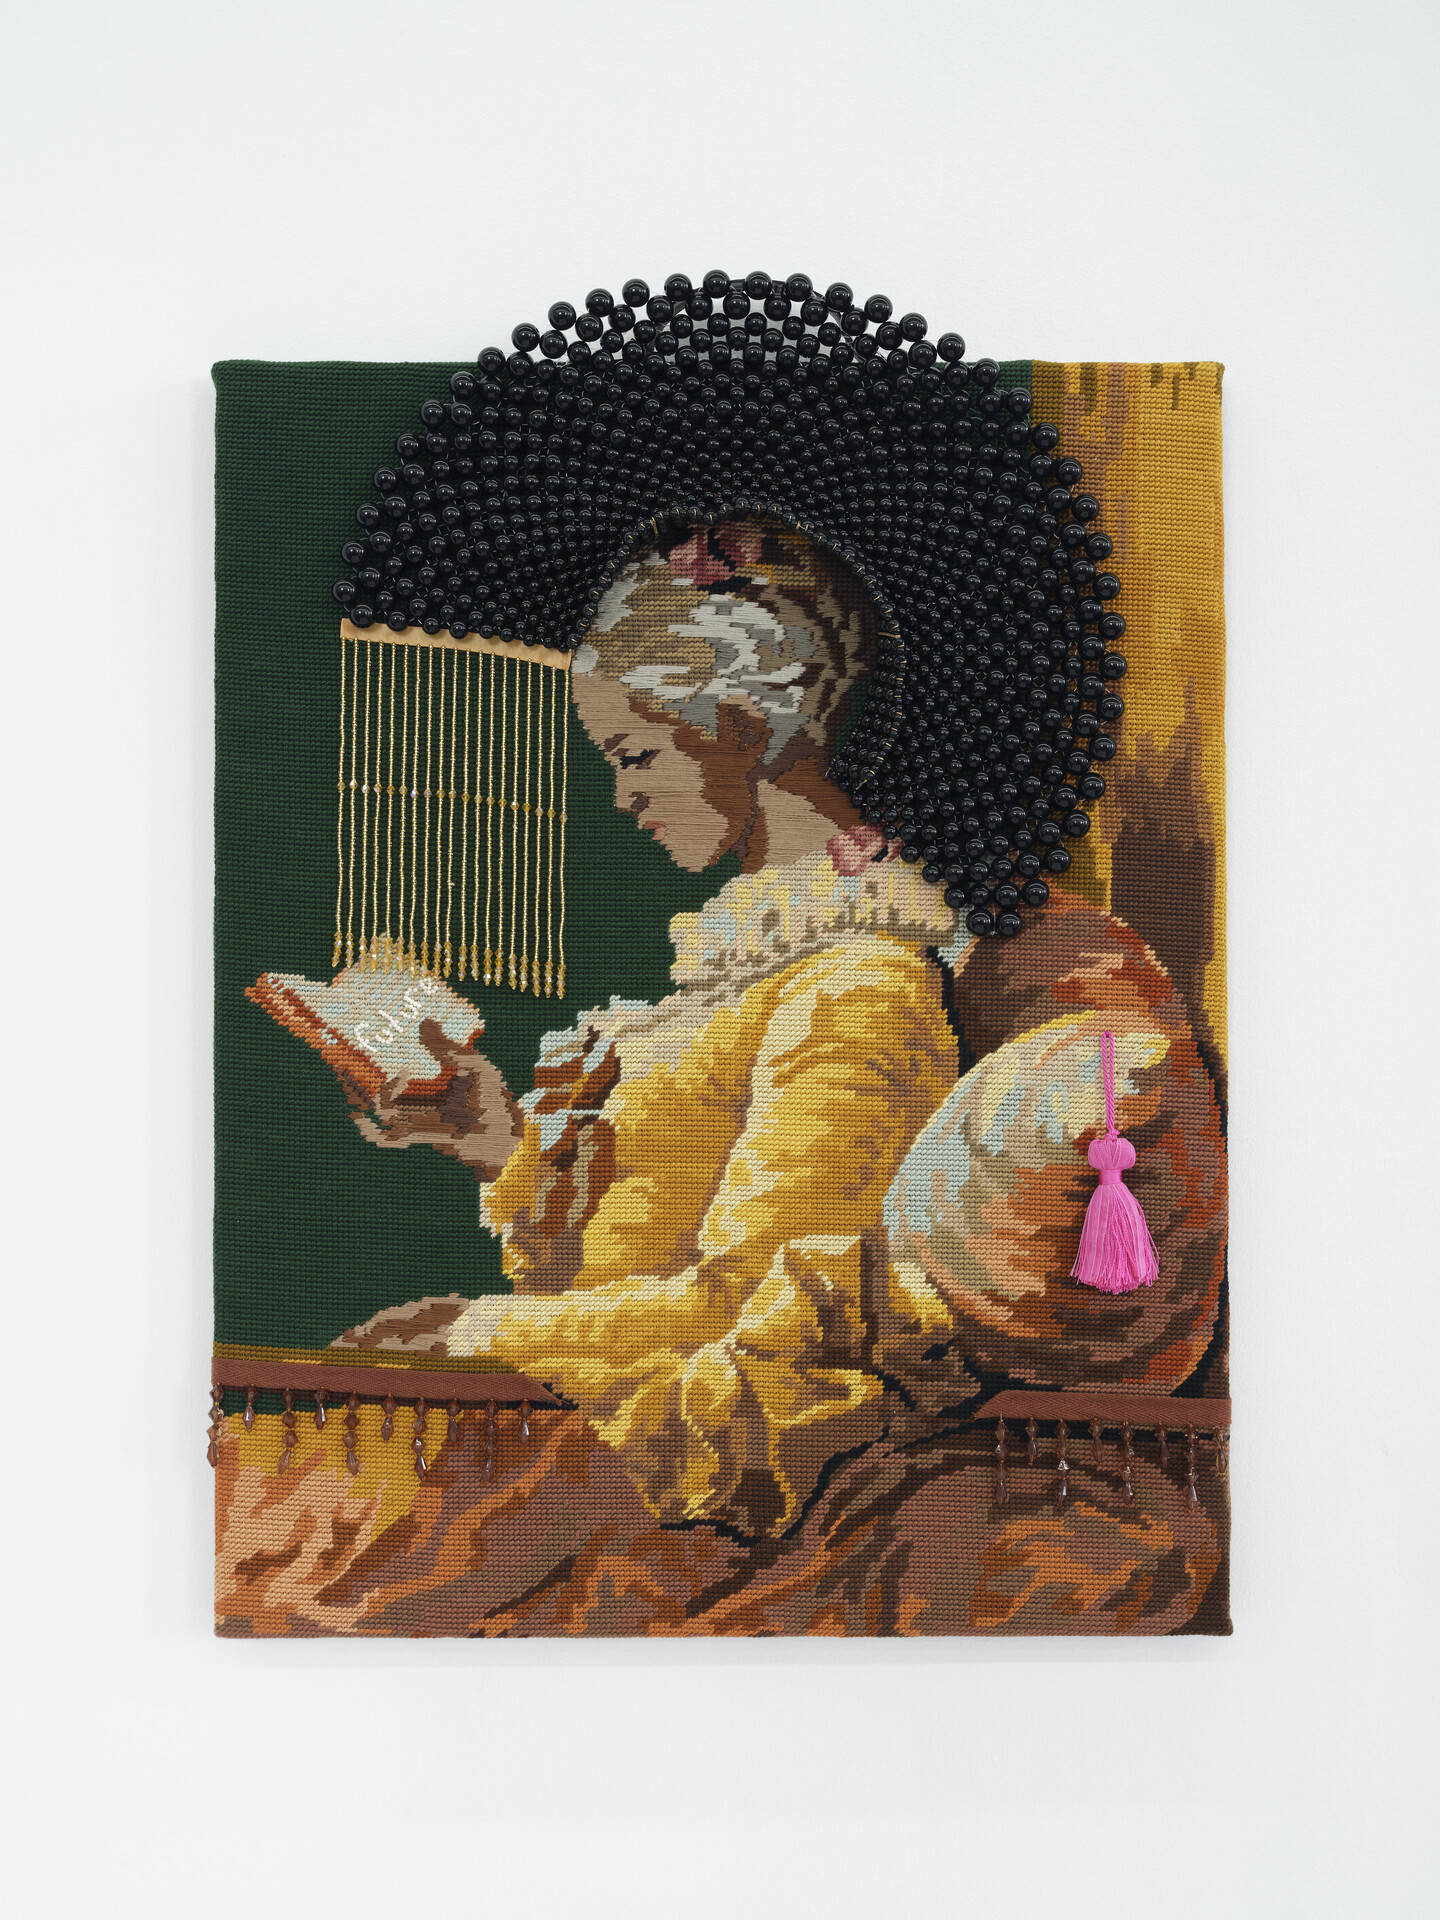 A needlepoint depicting, in profile, a seated, young girl with medium skin tone and dark hair in a yellow dress reading a book. A halo of black beads surrounds her bowed head.